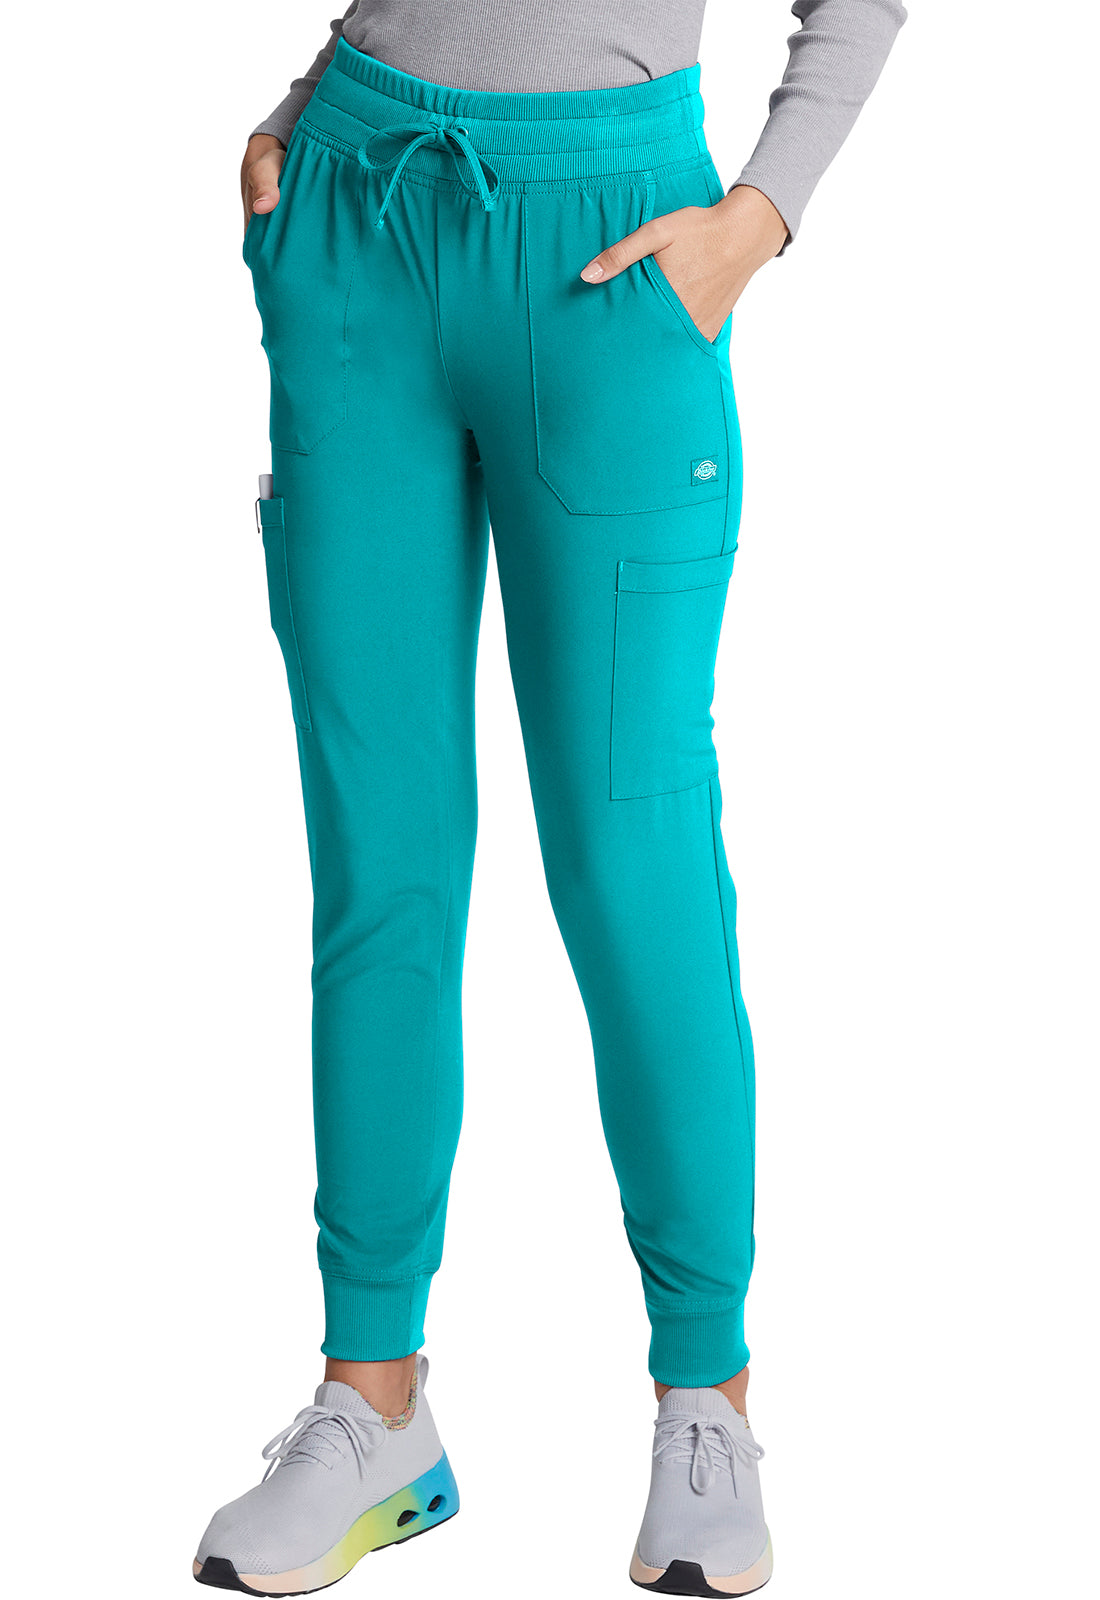 Nurse Scrub Pants Dickies EDS Essentials Mid Rise Joggers made from poly/spandex for extra comfort and movement